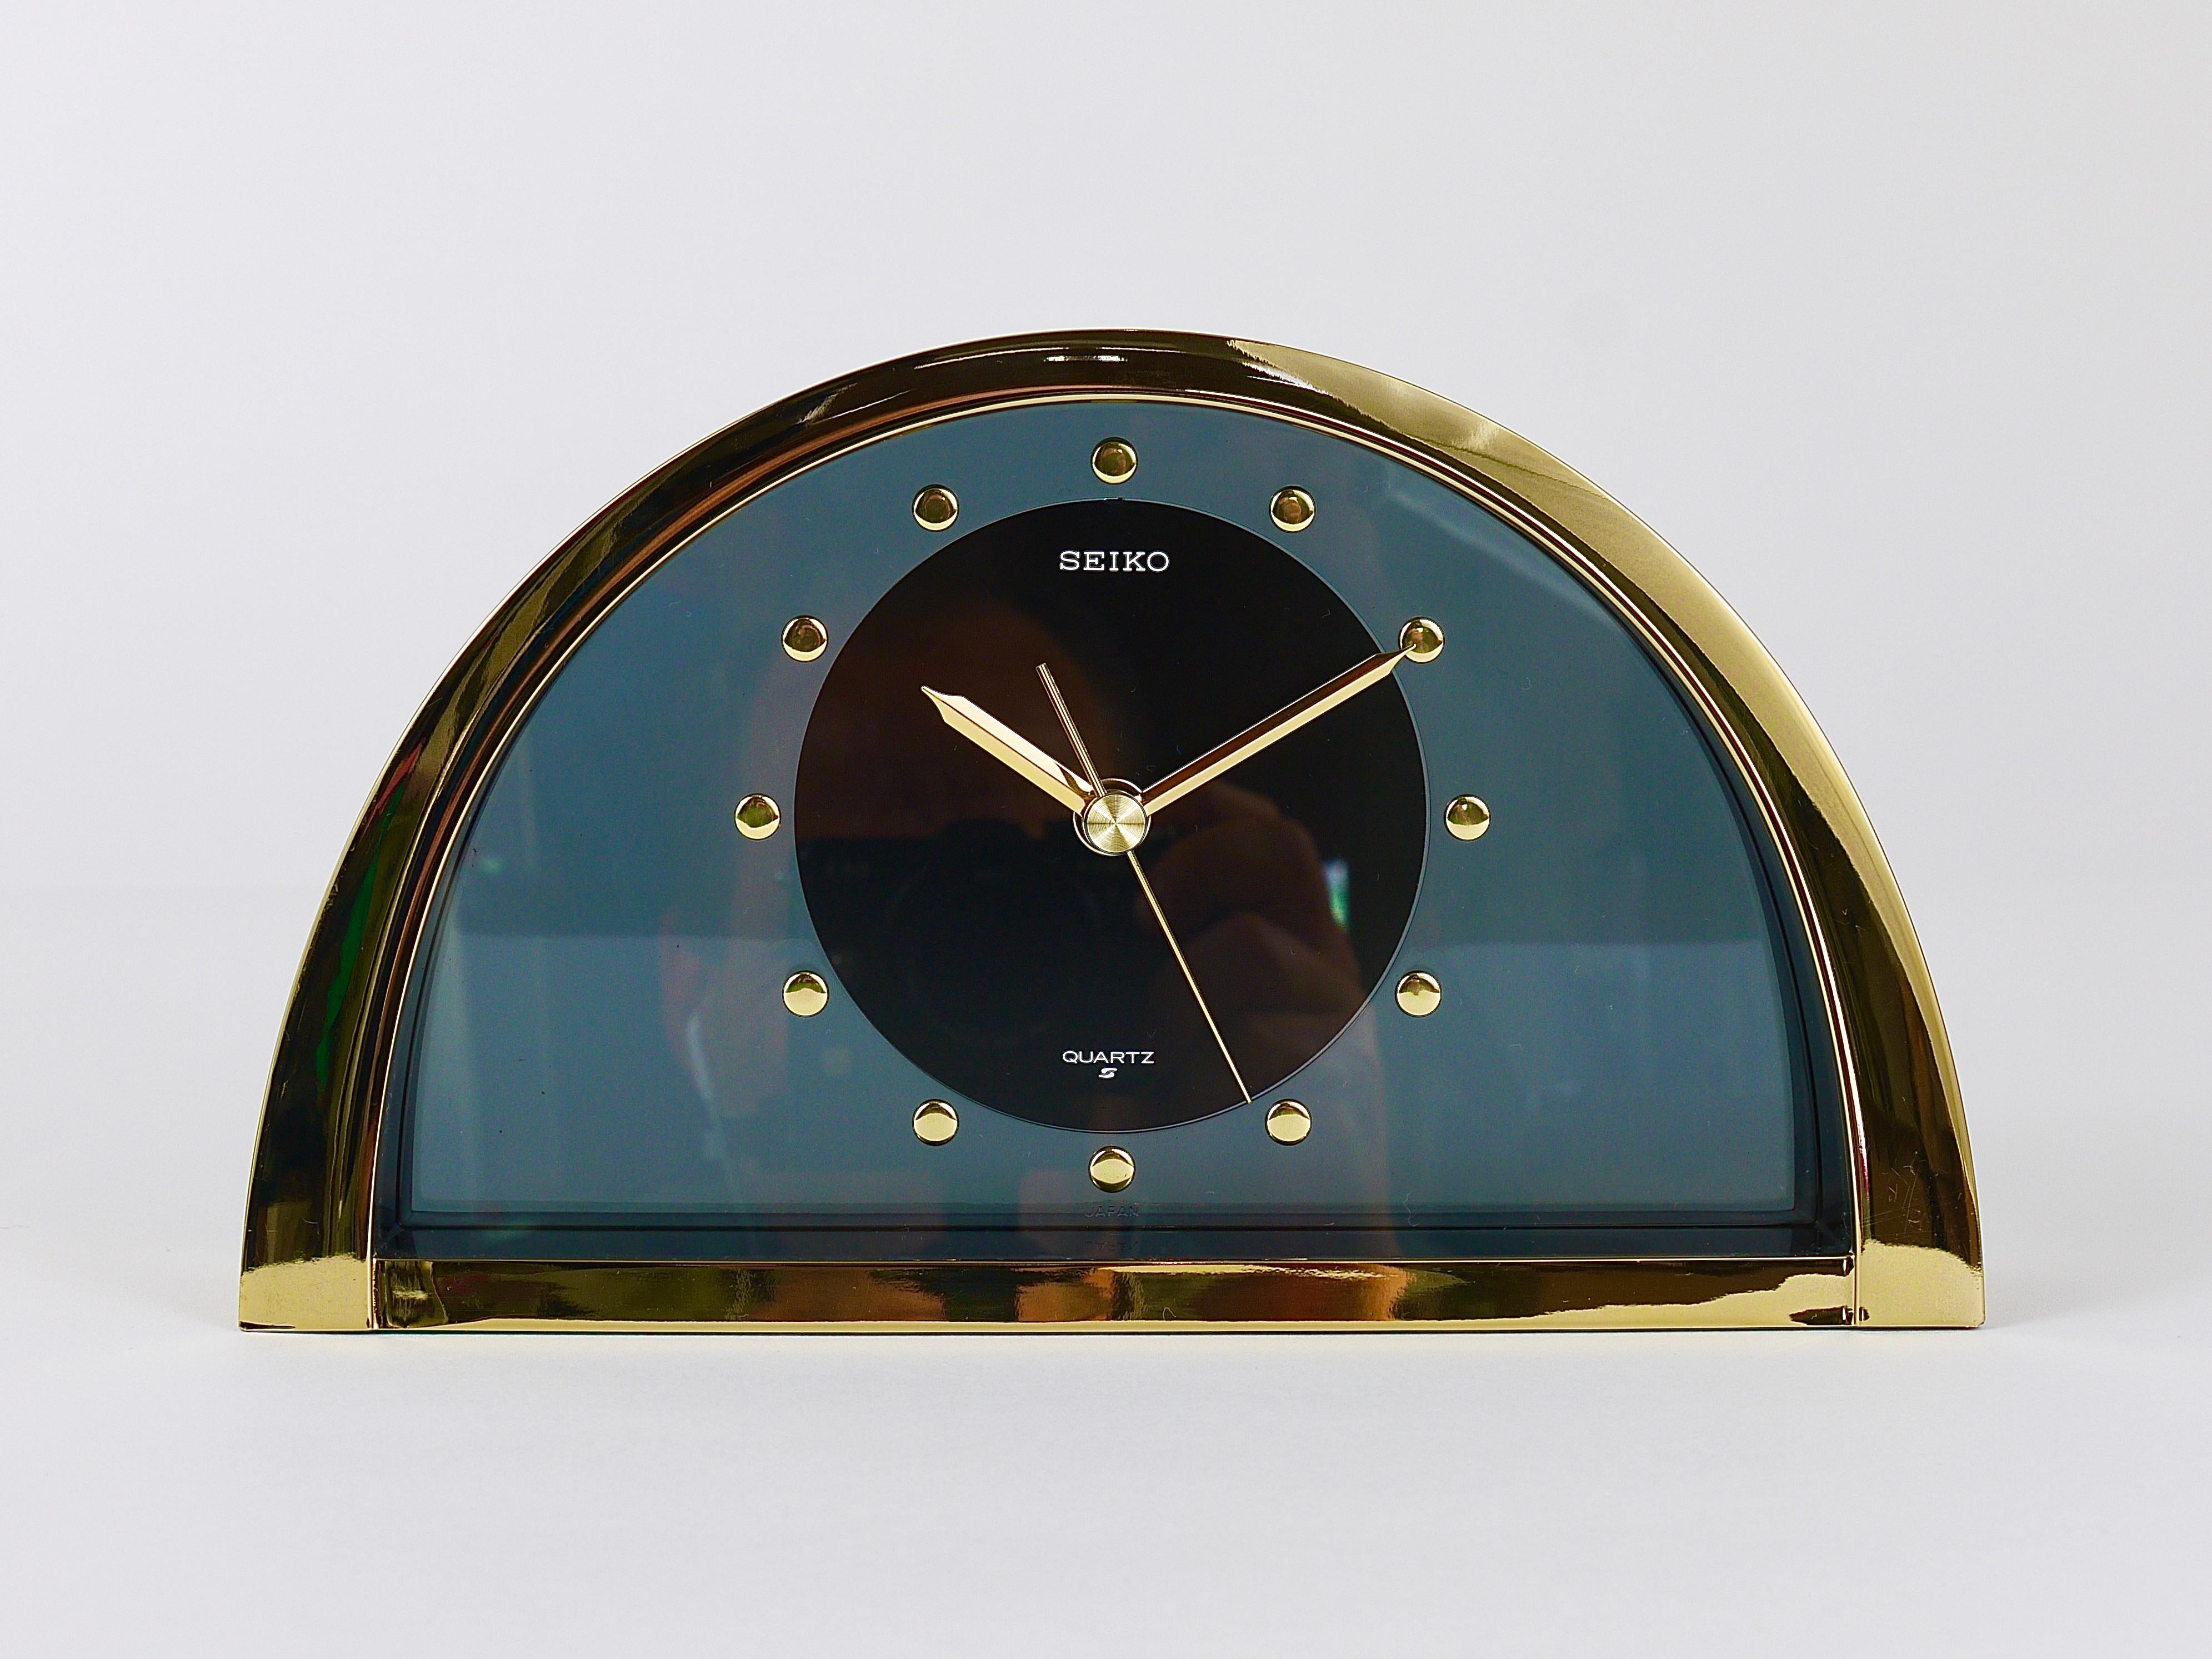 A decorative Hollywood Regency desk or table clock from the 1980s. It has a partly brushed and polished brass housing with nice golden handles and a smoked-grey transparent clocks face. Executed by Seiko, Japan. In excellent condition, a very